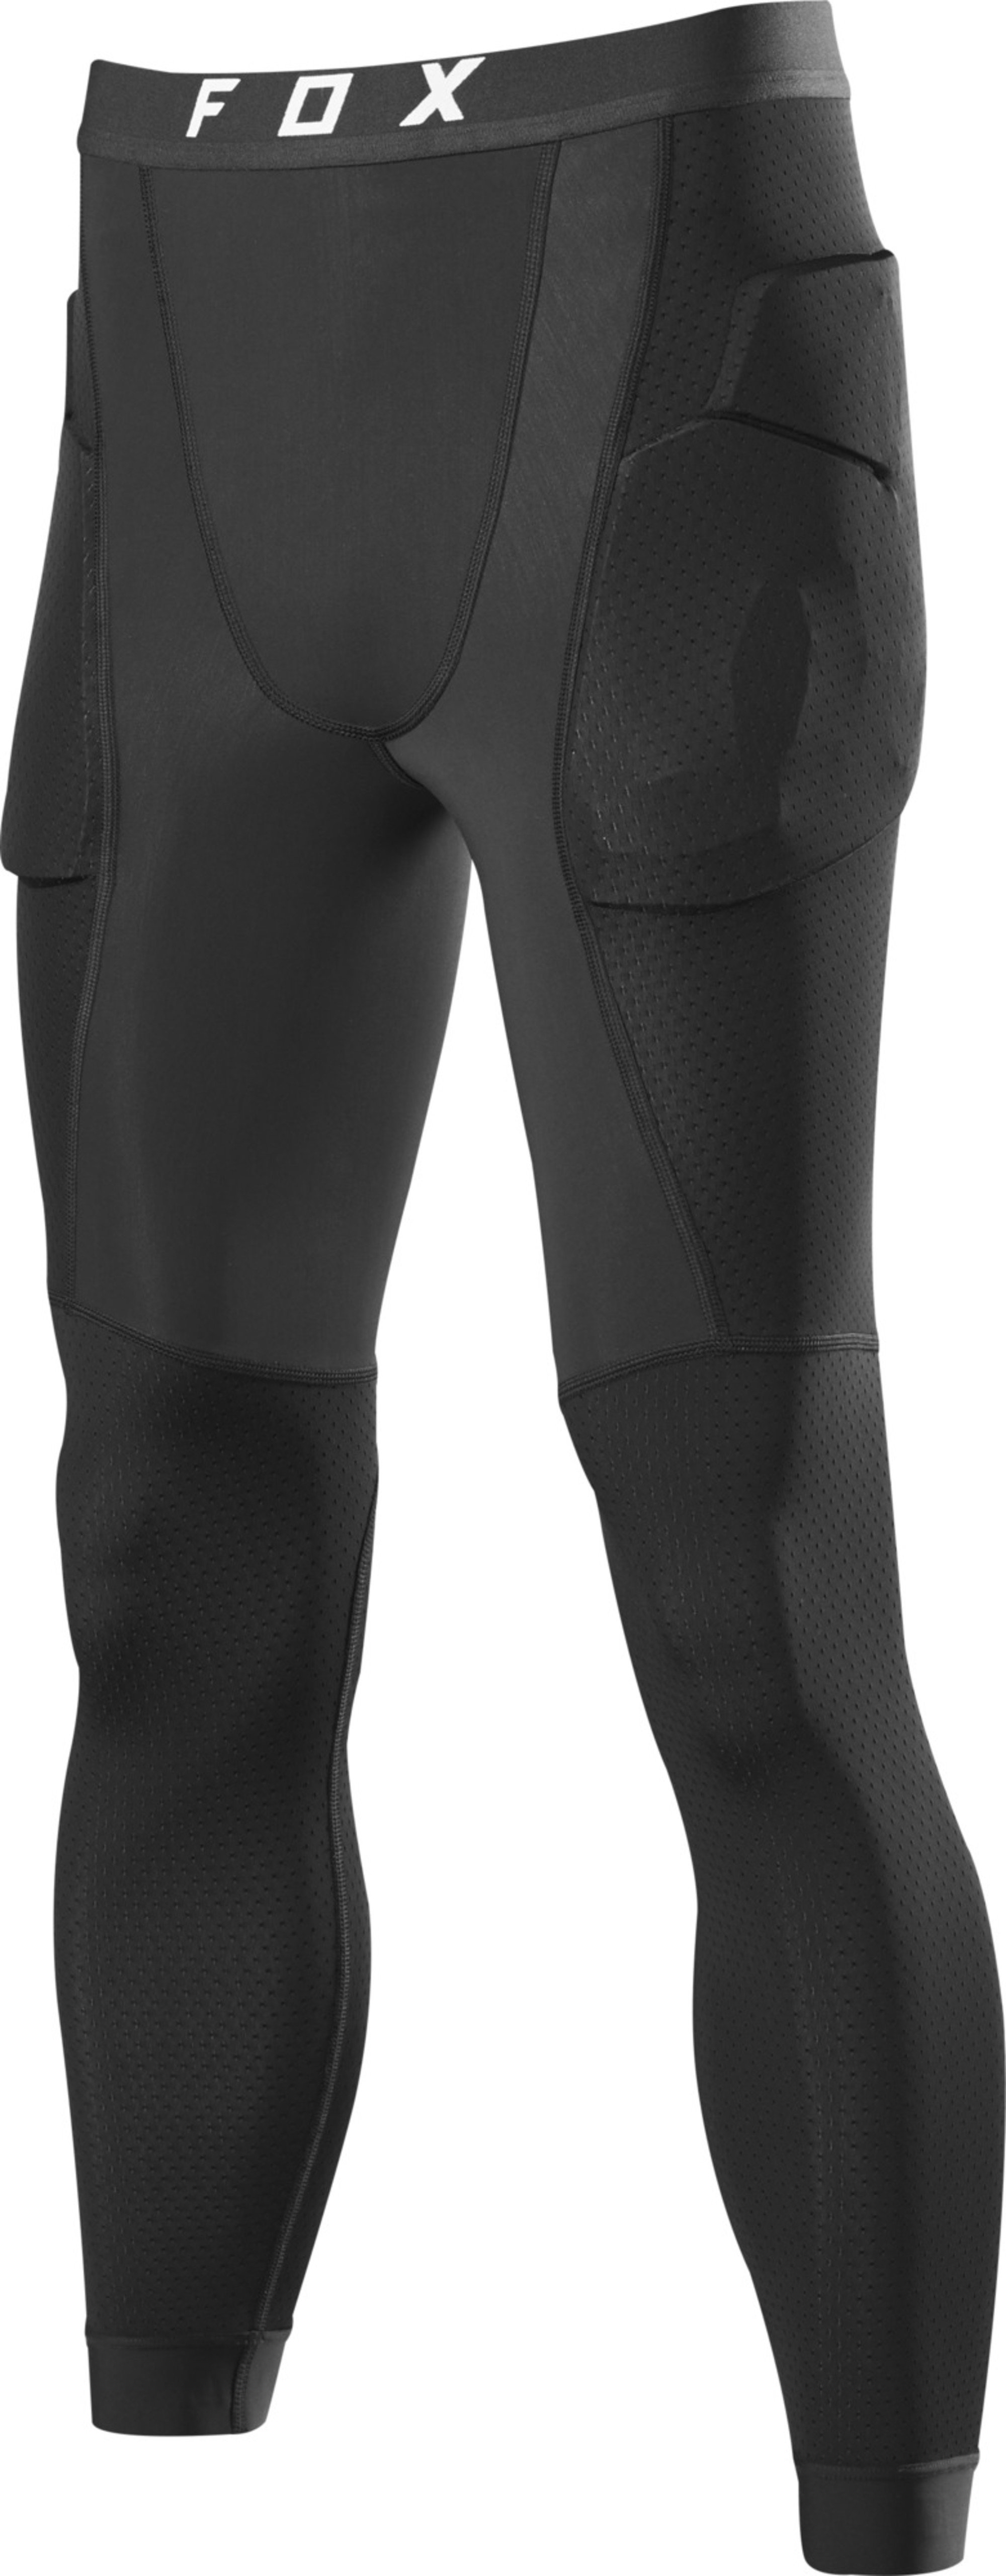 fox racing protections  baseframe pro pant under protection - dirt bike